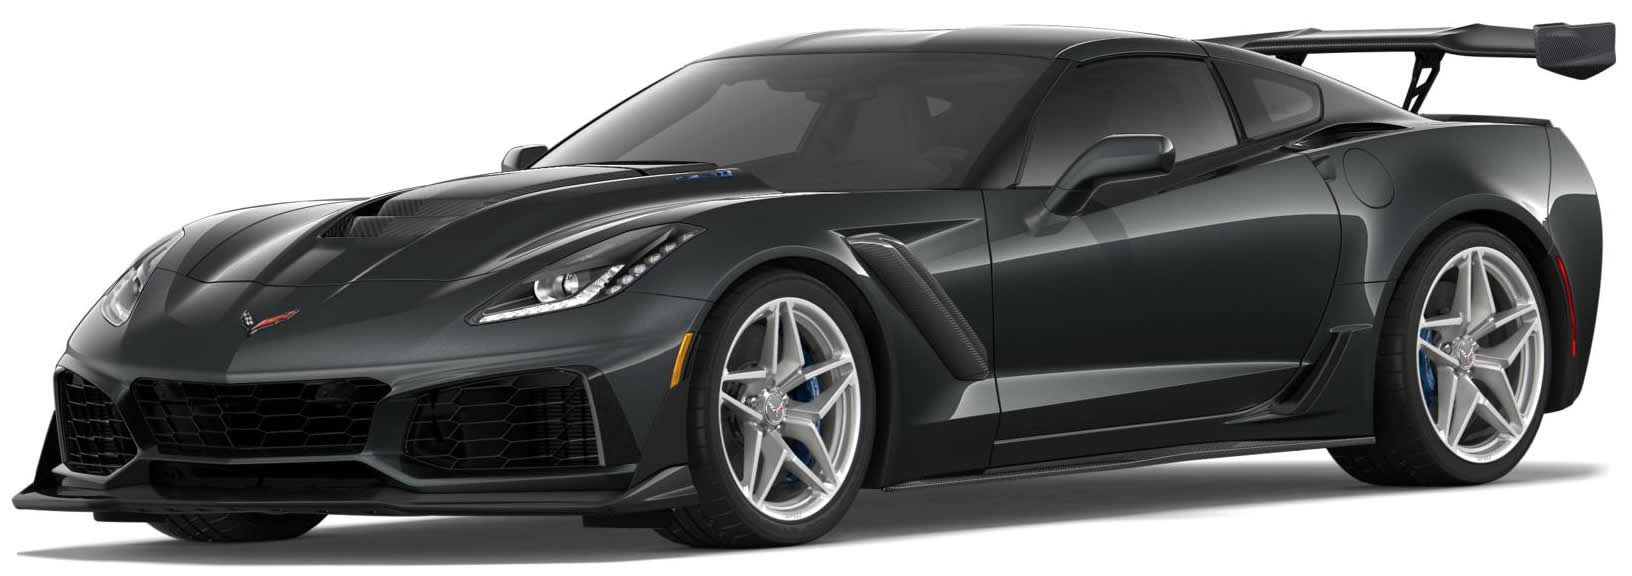 2019 Corvette ZR1 Coupe in Watkins Glen Gray Metallic with the ZTK Track Performance Package